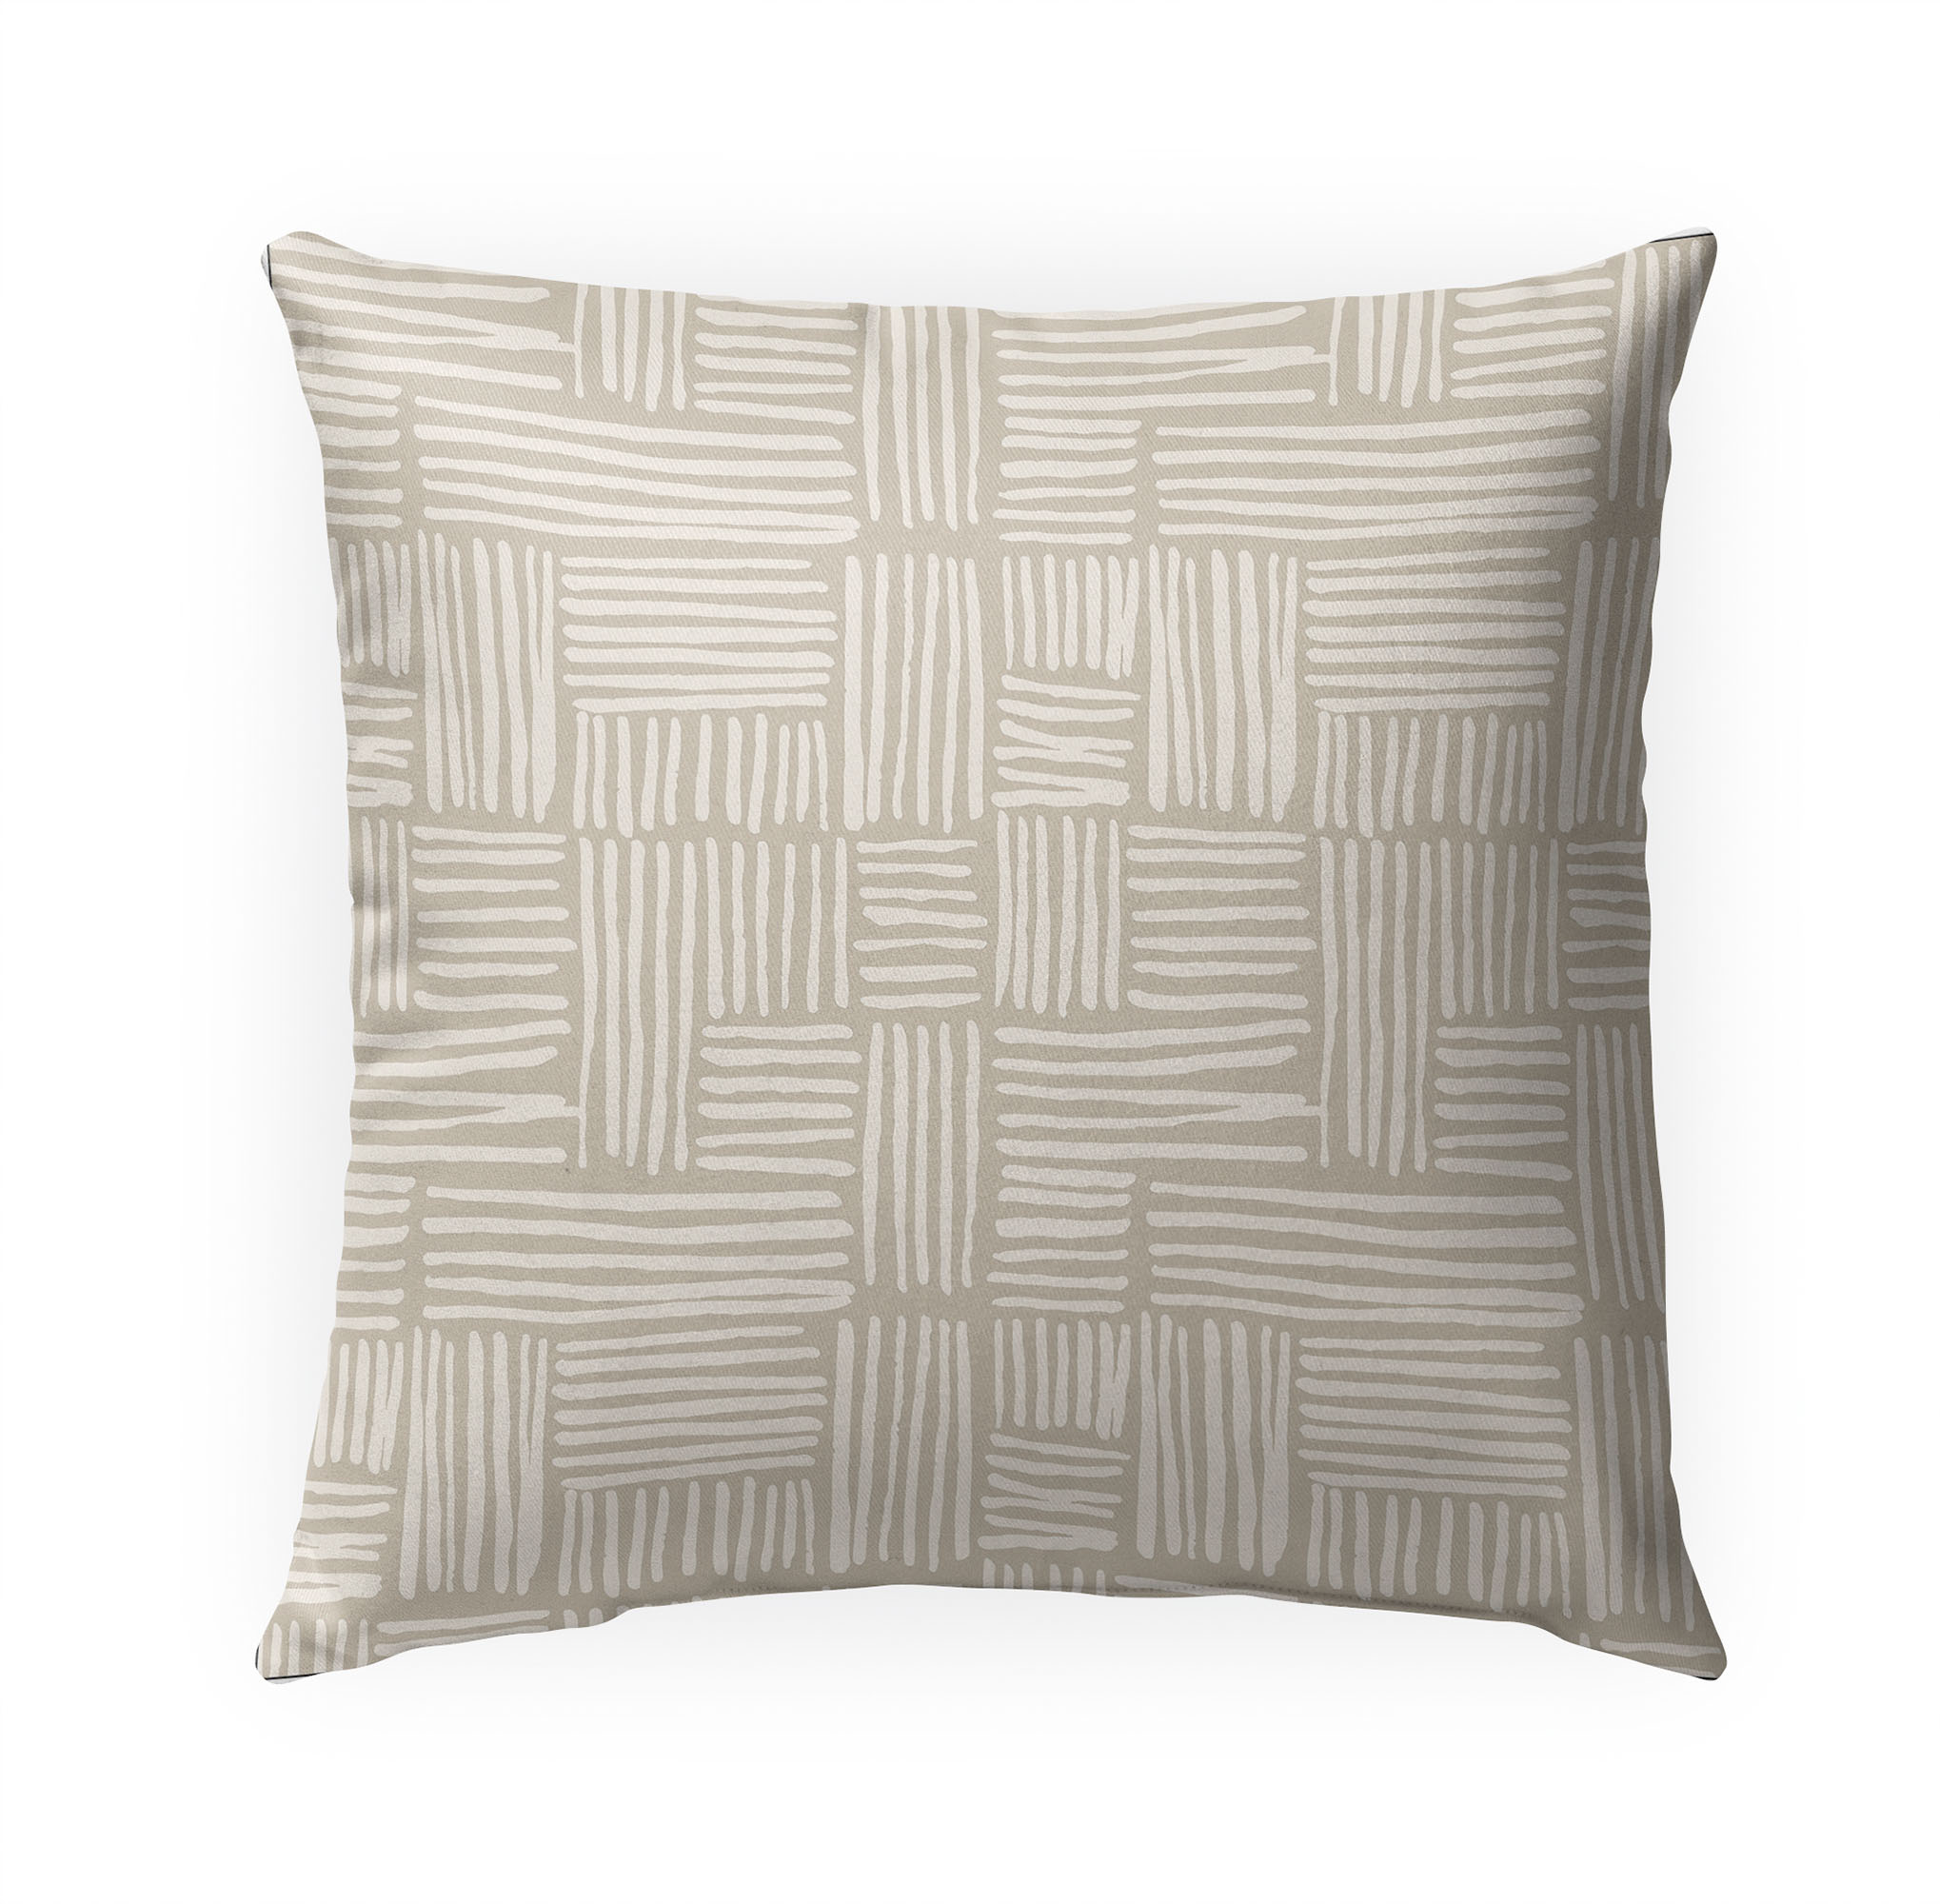 Rails Beige Outdoor Pillow by Kavka Designs - image 1 of 5